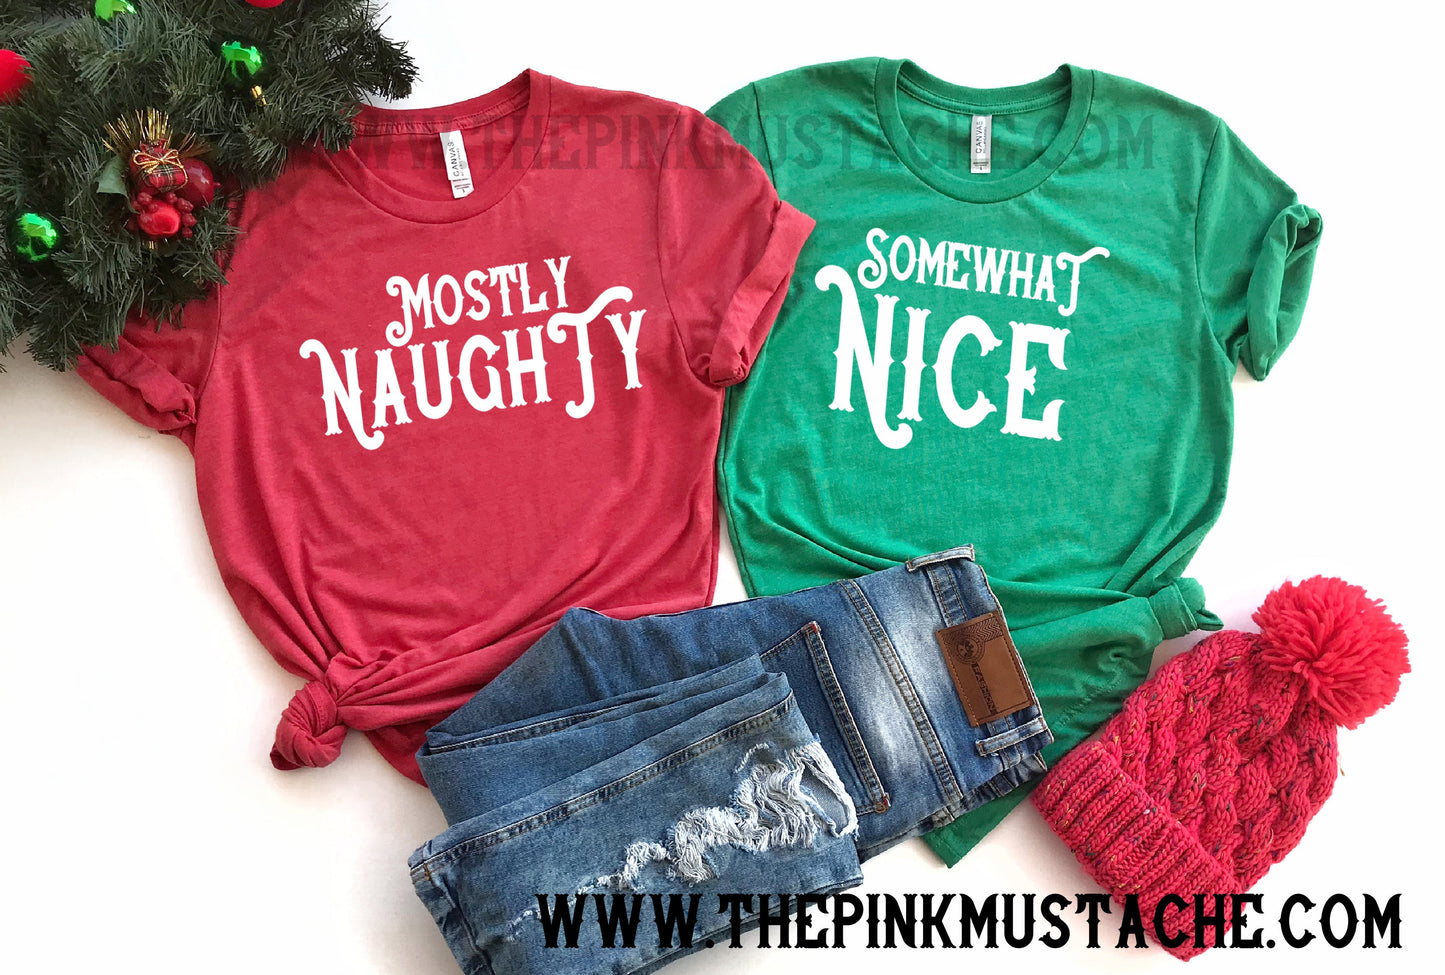 Mostly Naughty Somewhat Nice - Funny Matching Shirts / Couple Matching Tees / Friend Christmas Shirt